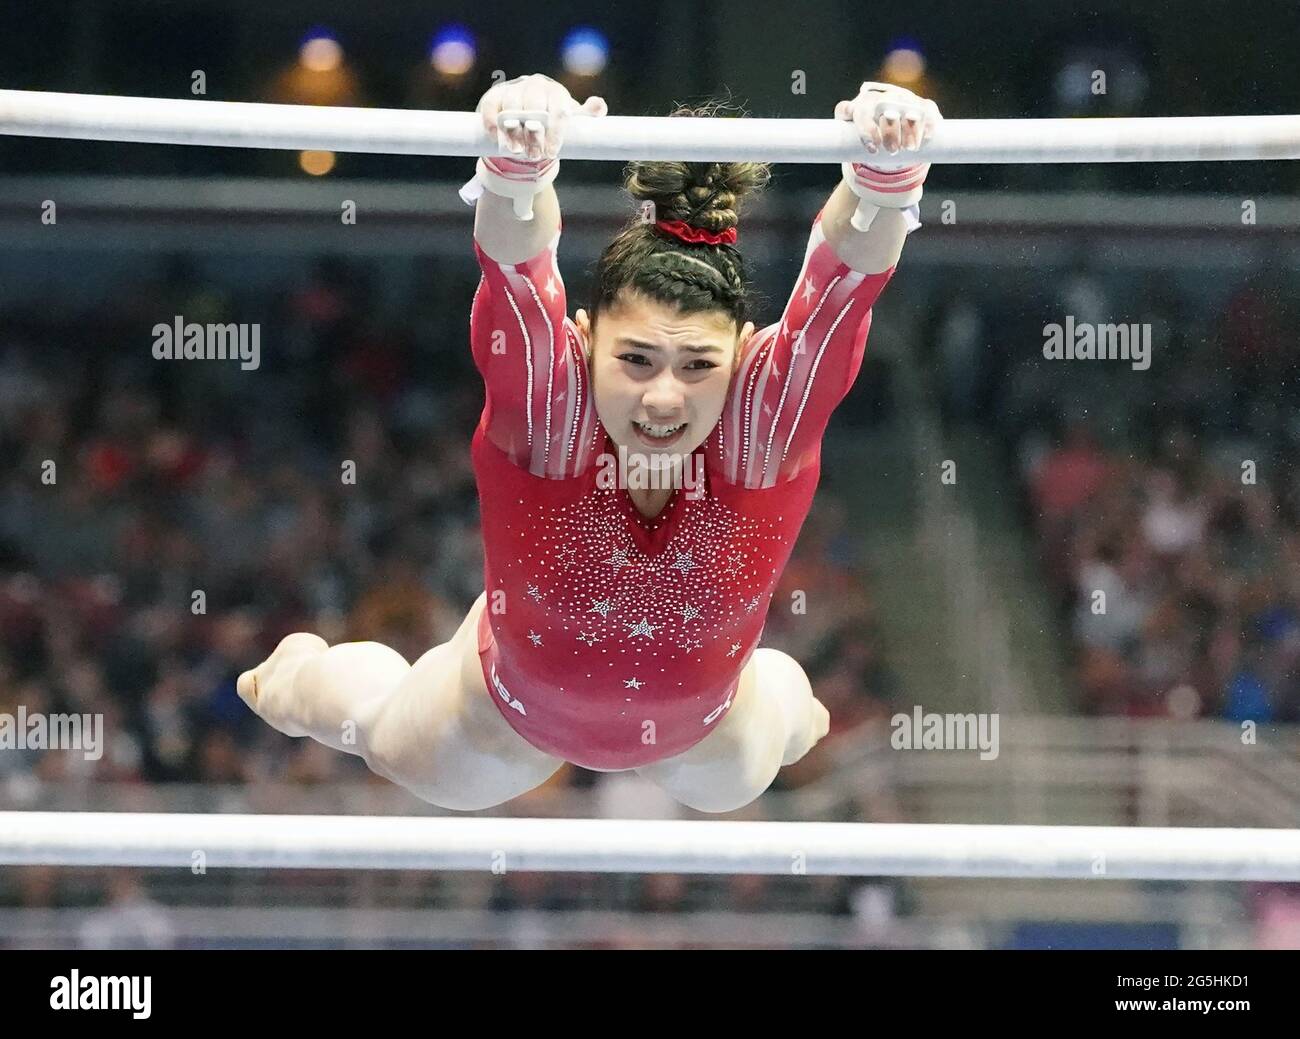 St. Louis, United States. 28th June, 2021. Gymnast Kayla DiCello preforms on the uneven bars during Day 2 of the Women's U.S. Olympic Gymnastic Trials at the The Dome at America's Center in St. Louis on June 27, 2021. Photo by Bill Greenblatt/UPI Credit: UPI/Alamy Live News Stock Photo